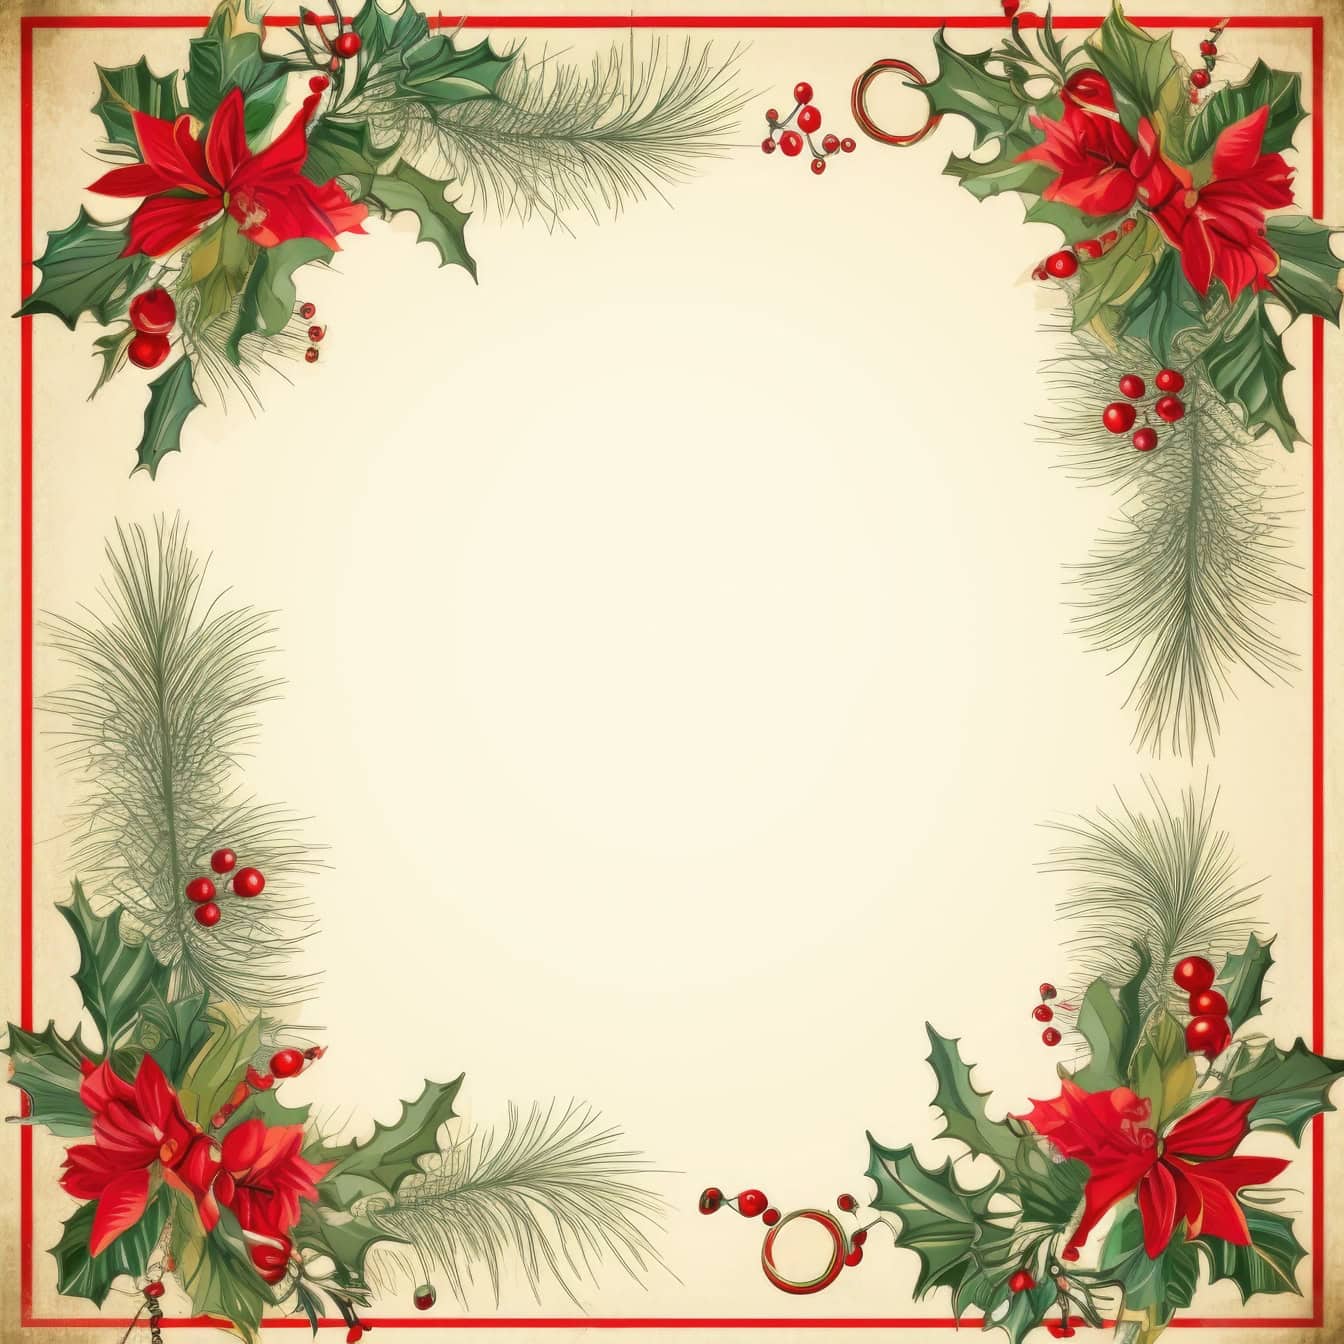 Ornamental Christmas and New Year greeting card template in retro style with square frame with red berries and green leaves